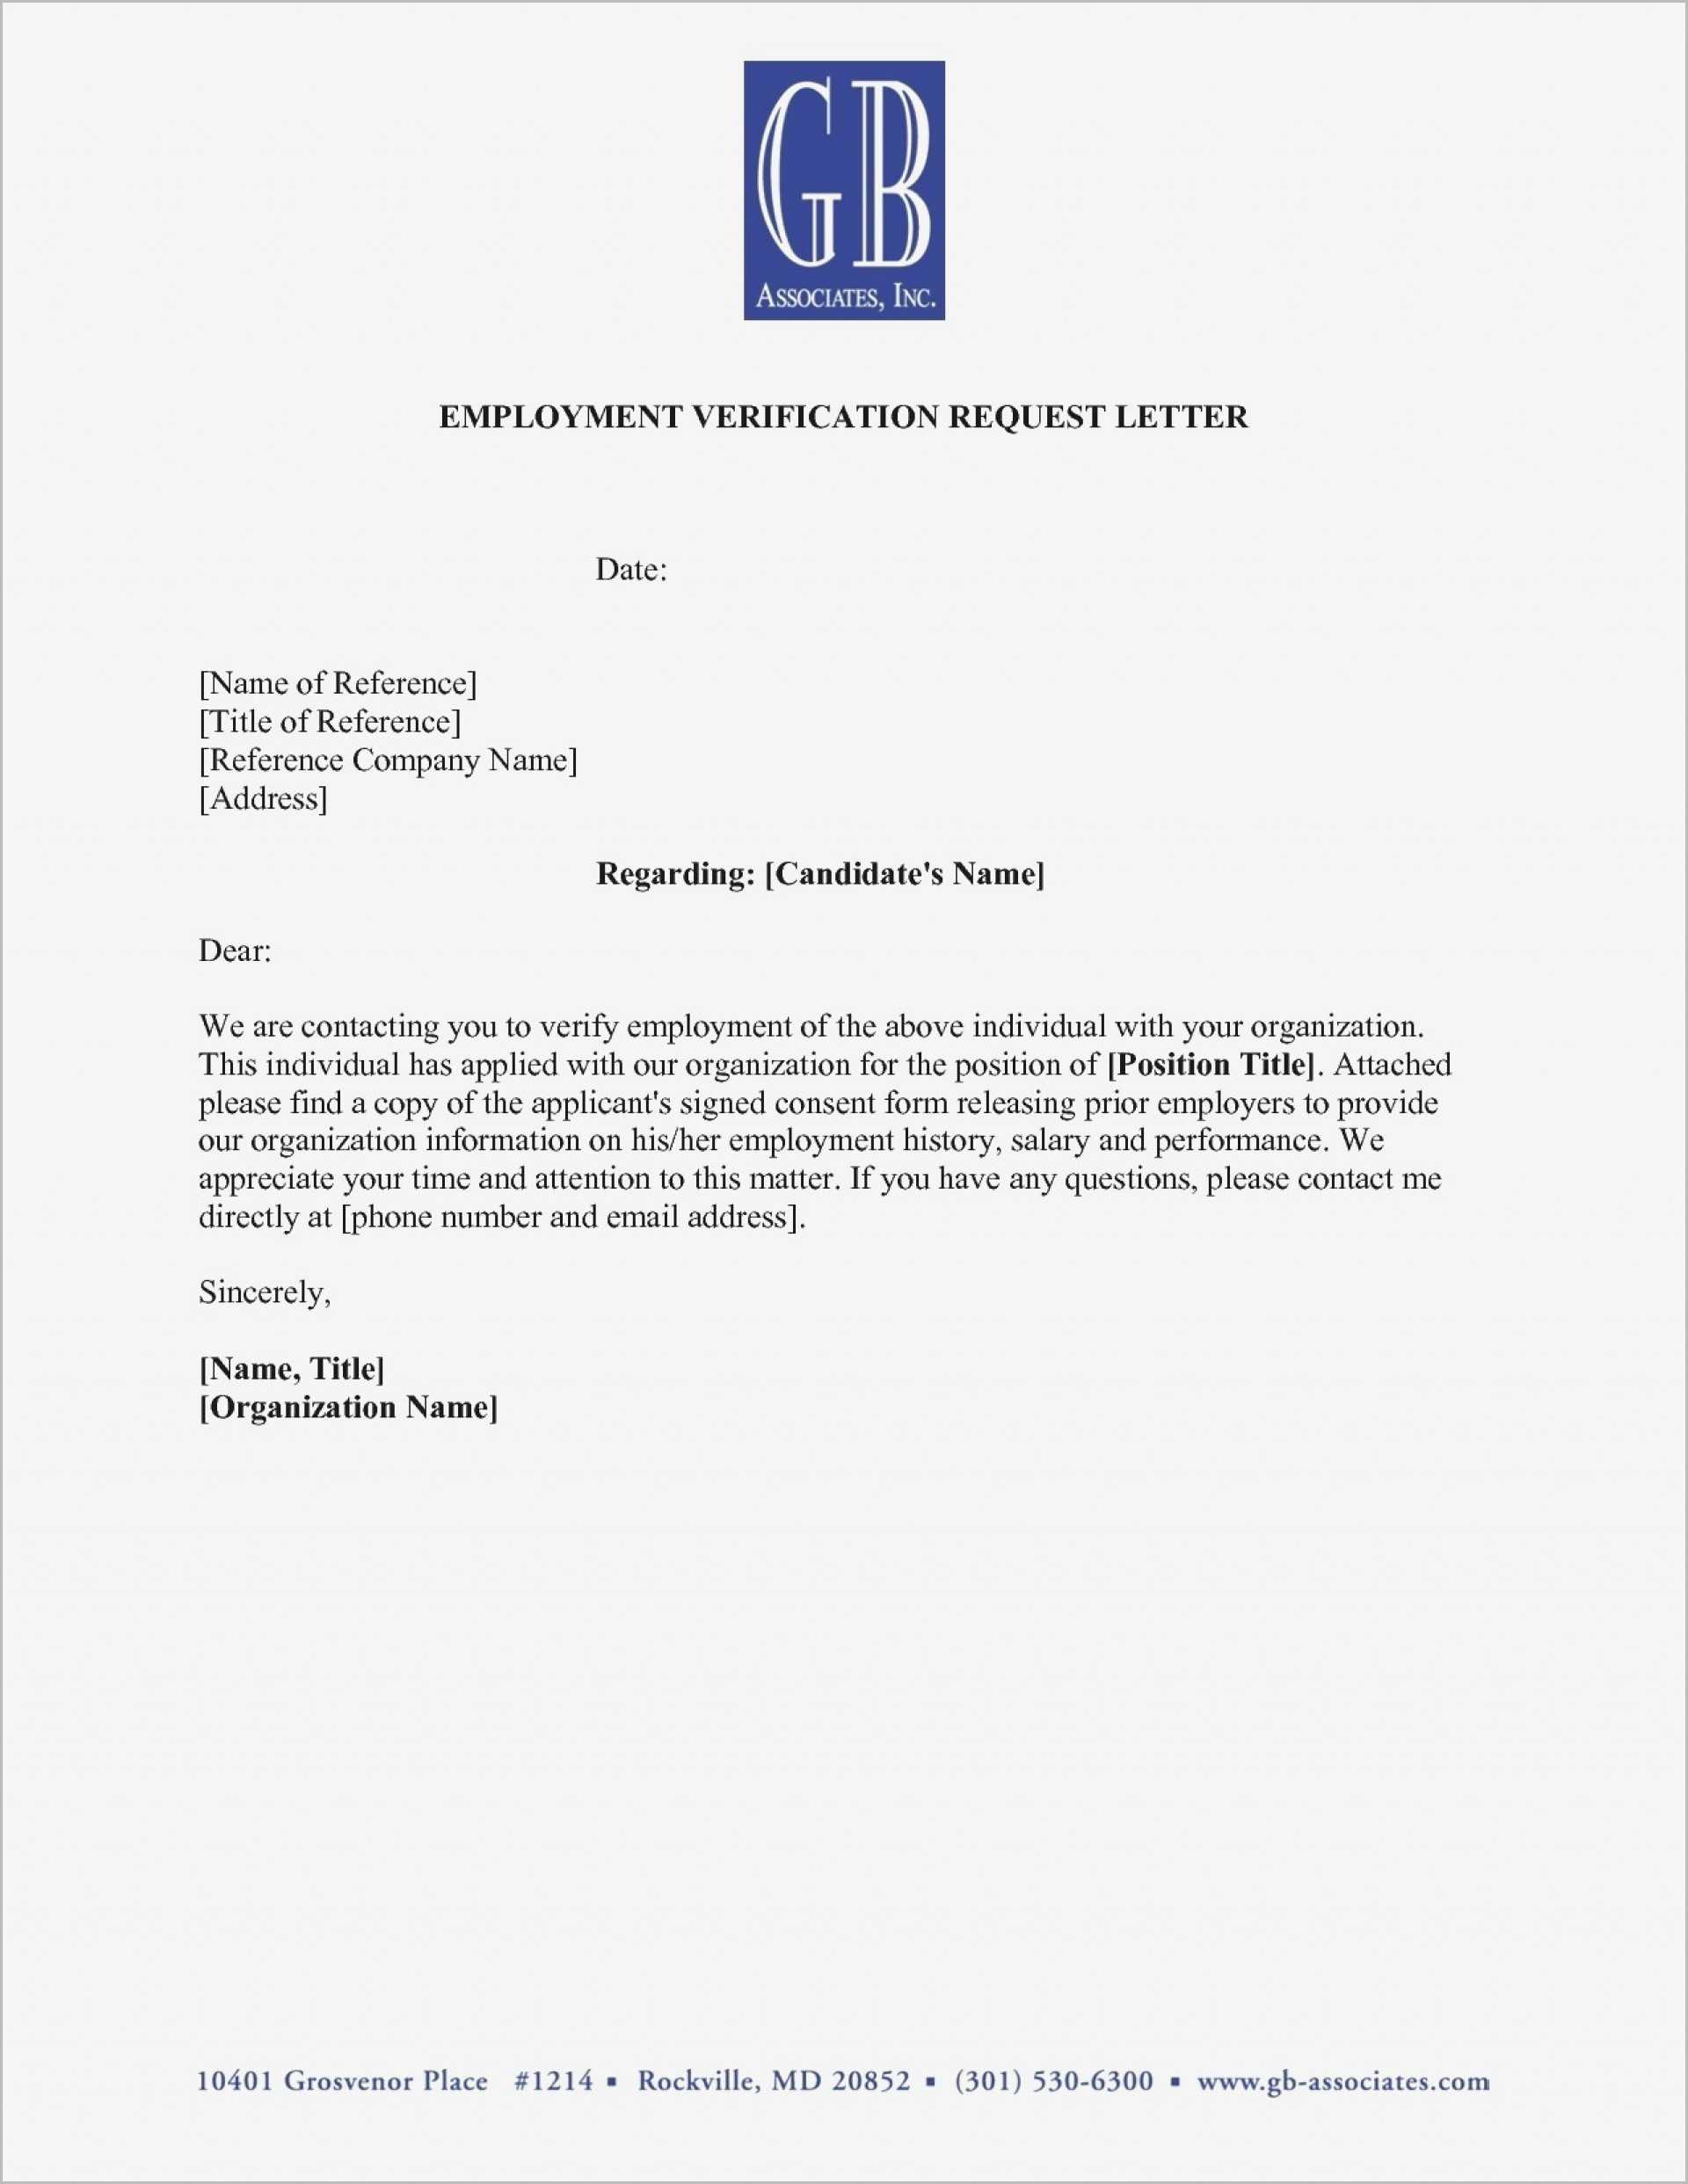 039 Employment Verification Letter Template Word Free Ideas Throughout Employment Verification Letter Template Word